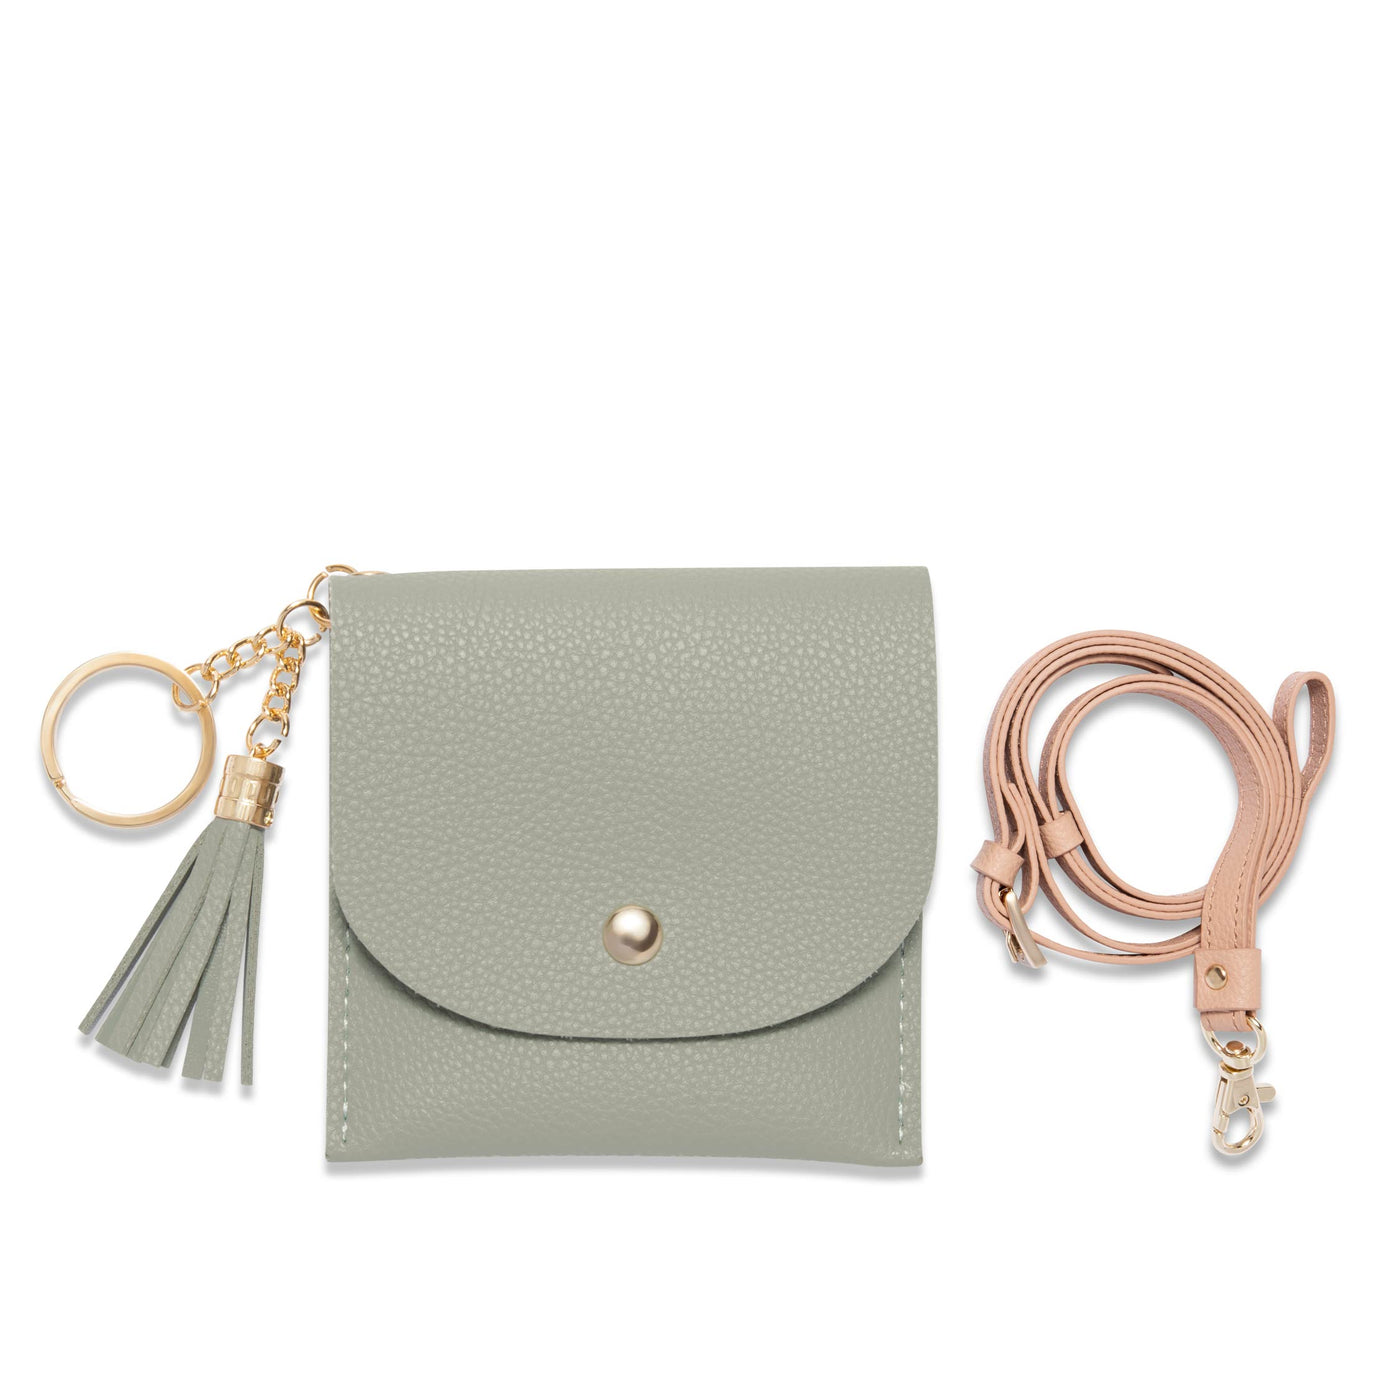 Lark and Ives / Vegan Leather Accessories / Small Accessories / Wallet / Mini Wallet / Card Case / Card Holder / Button snap closure / Flap Wallet / Card Purse with Gold Button and Keyring / Lanyard / Card Purse with Lanyard / Pale Green